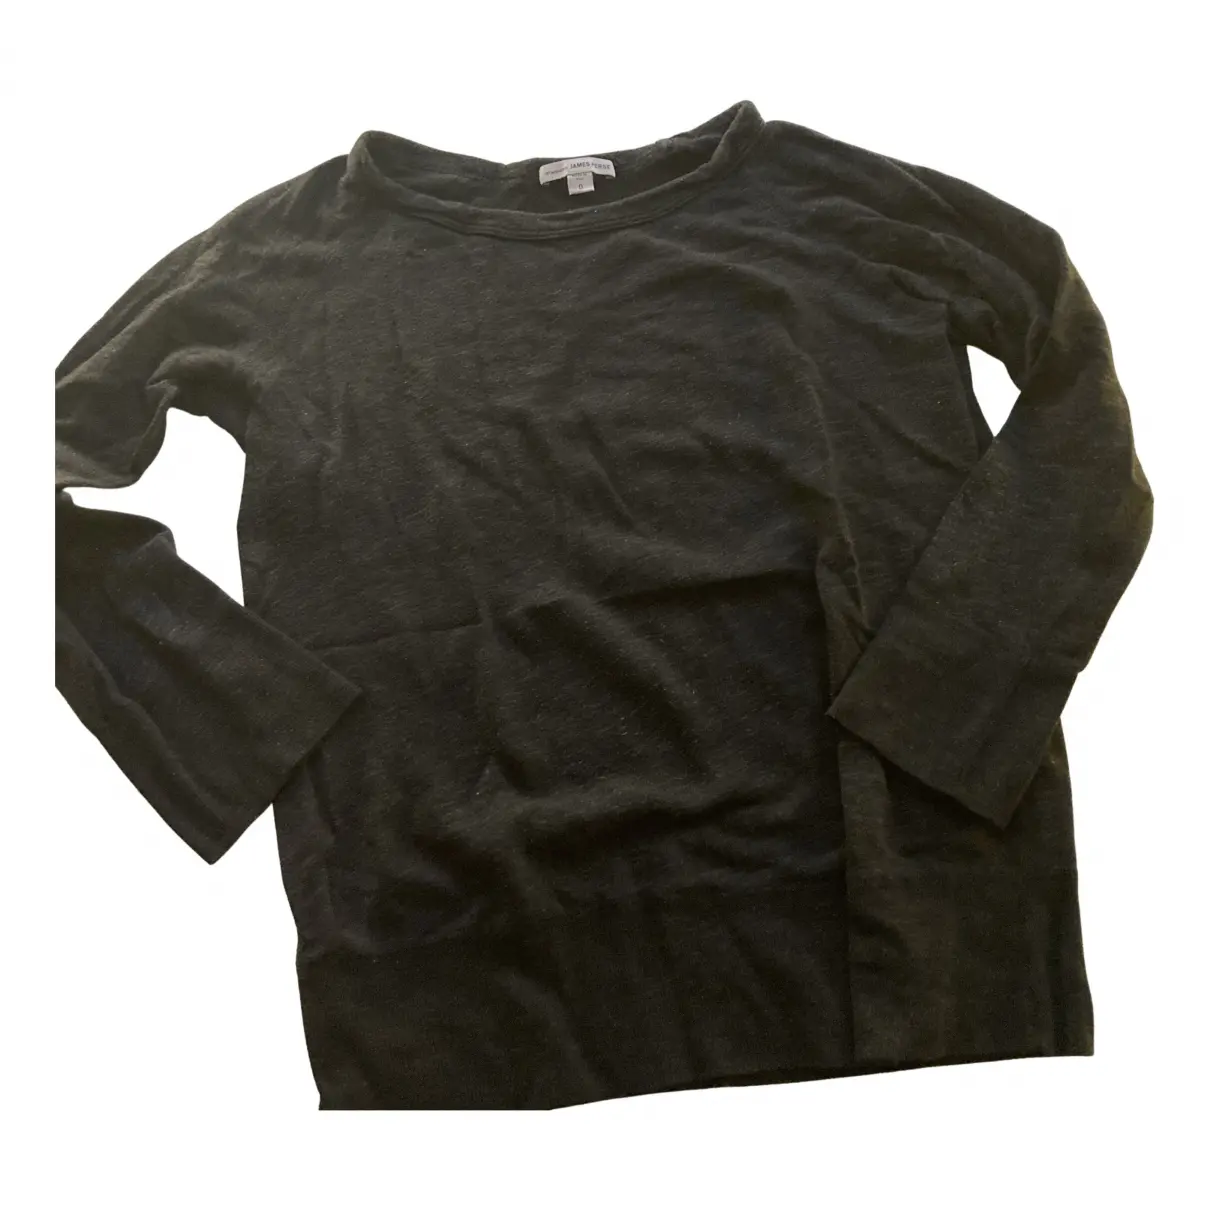 Anthracite Cotton Knitwear James Perse